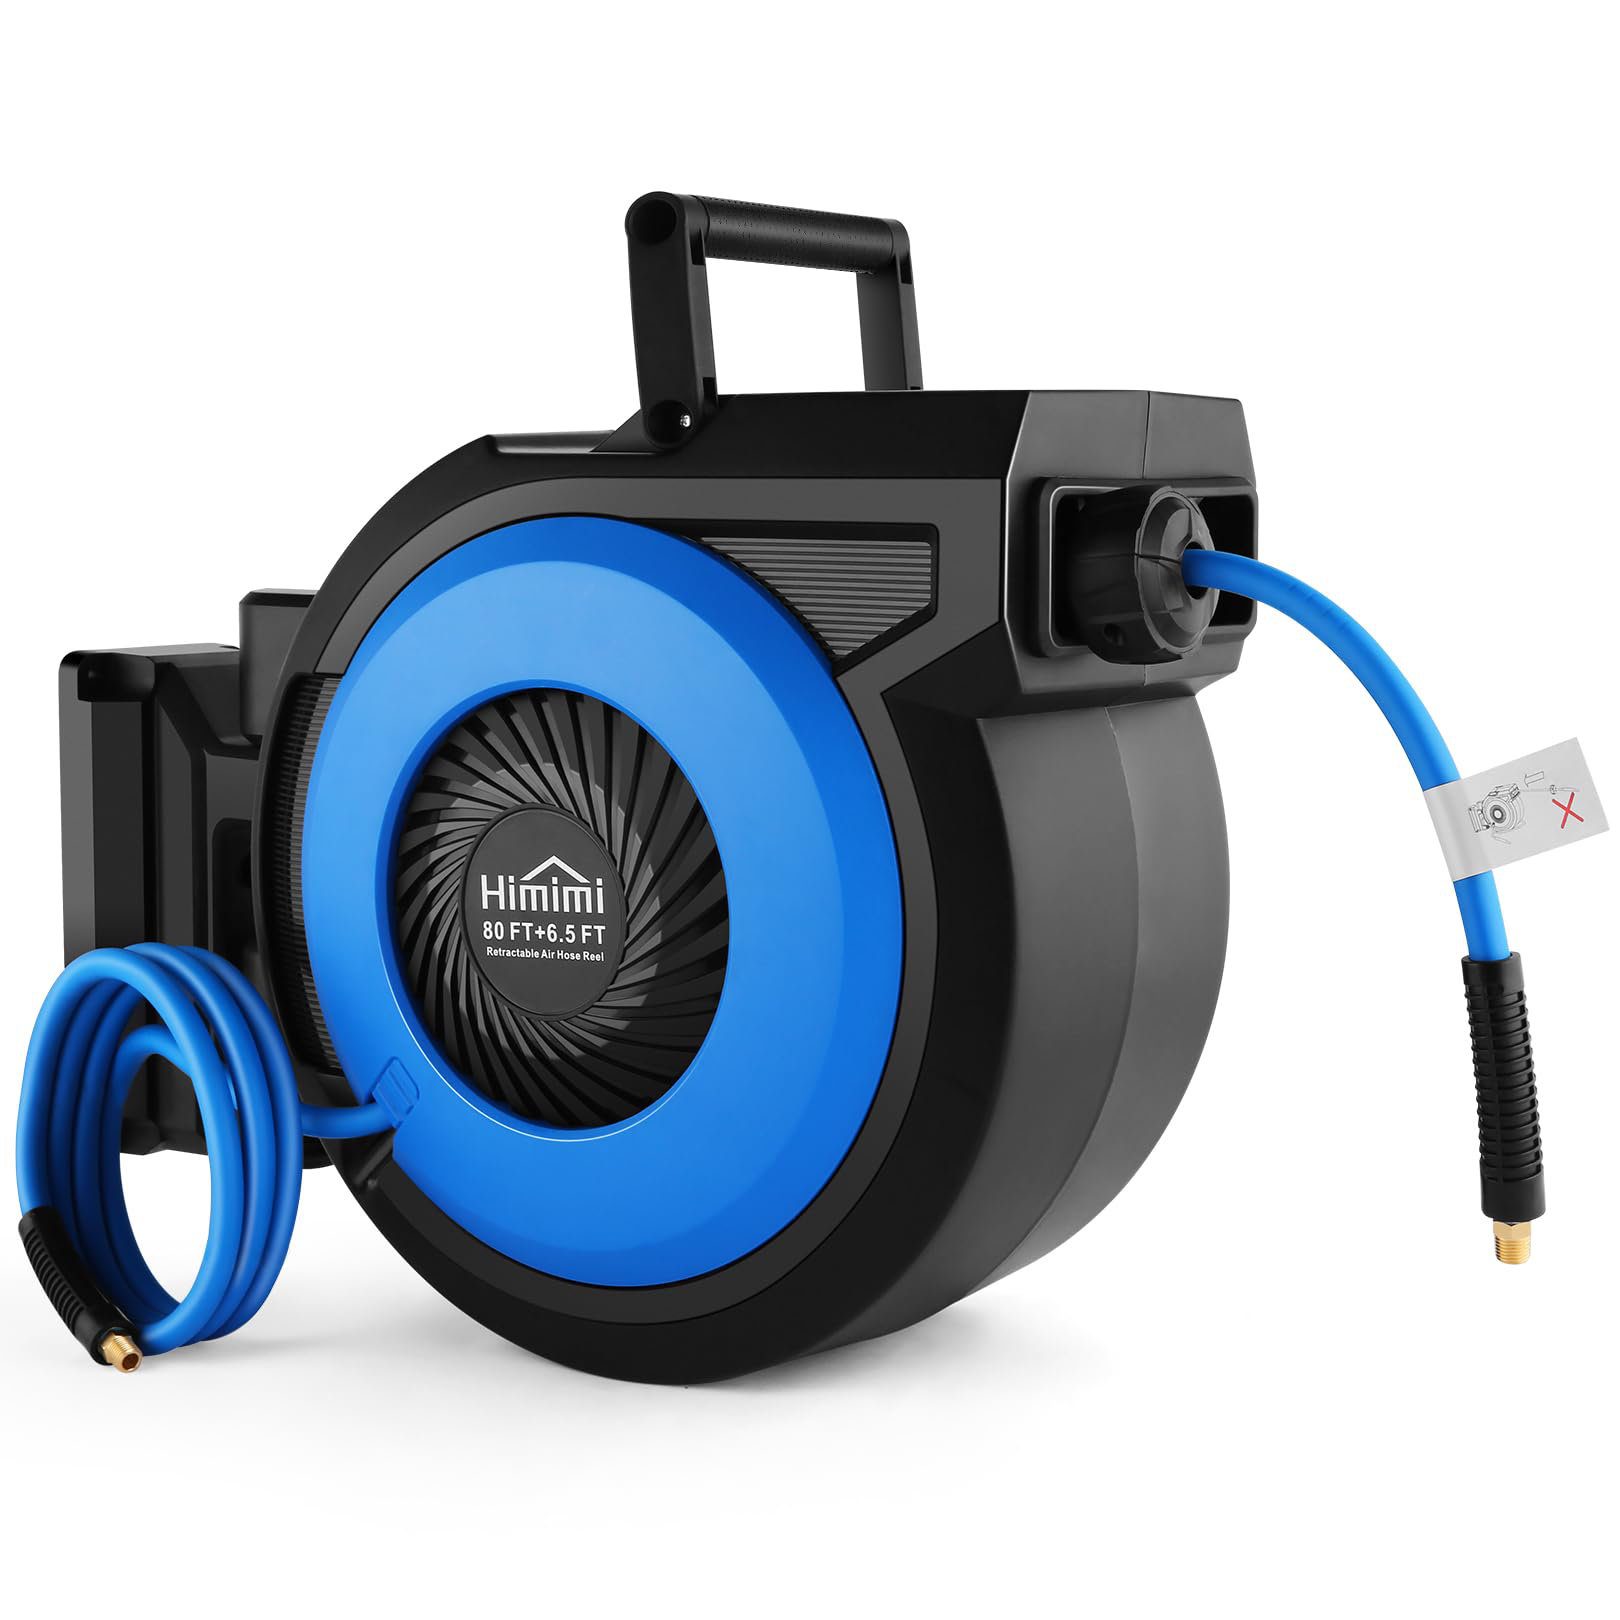 Himimi 80Ft Automatic Retractable Air Hose Reel Wall Mounted Hose